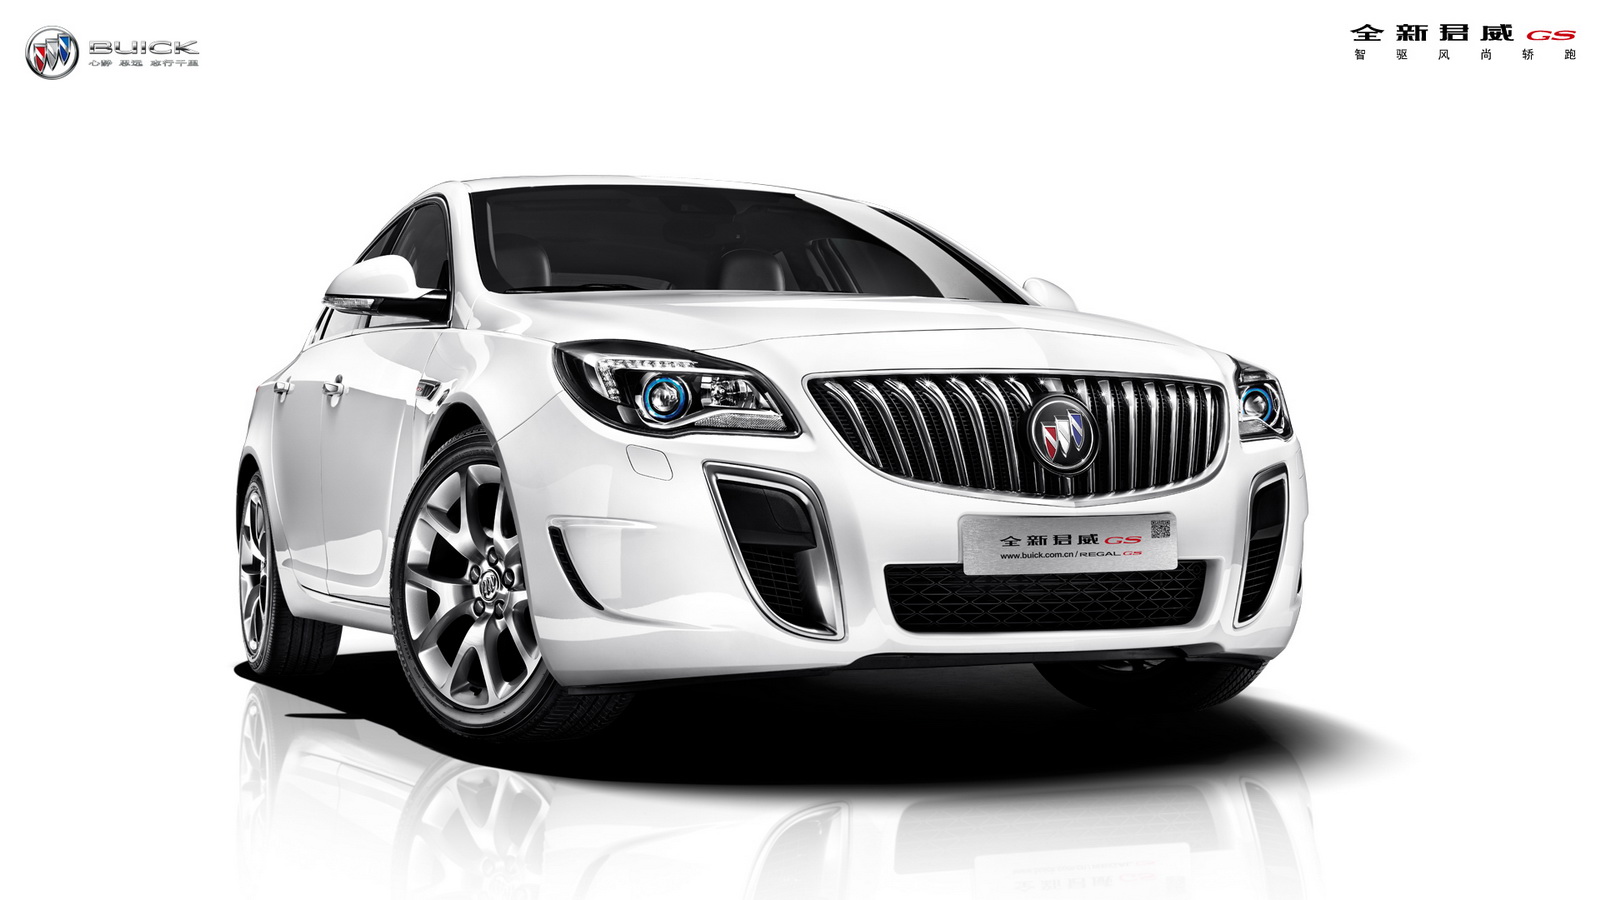 New Buick Regal Gets Standard Active-Hood In China To Protect Pedestrians | Carscoops